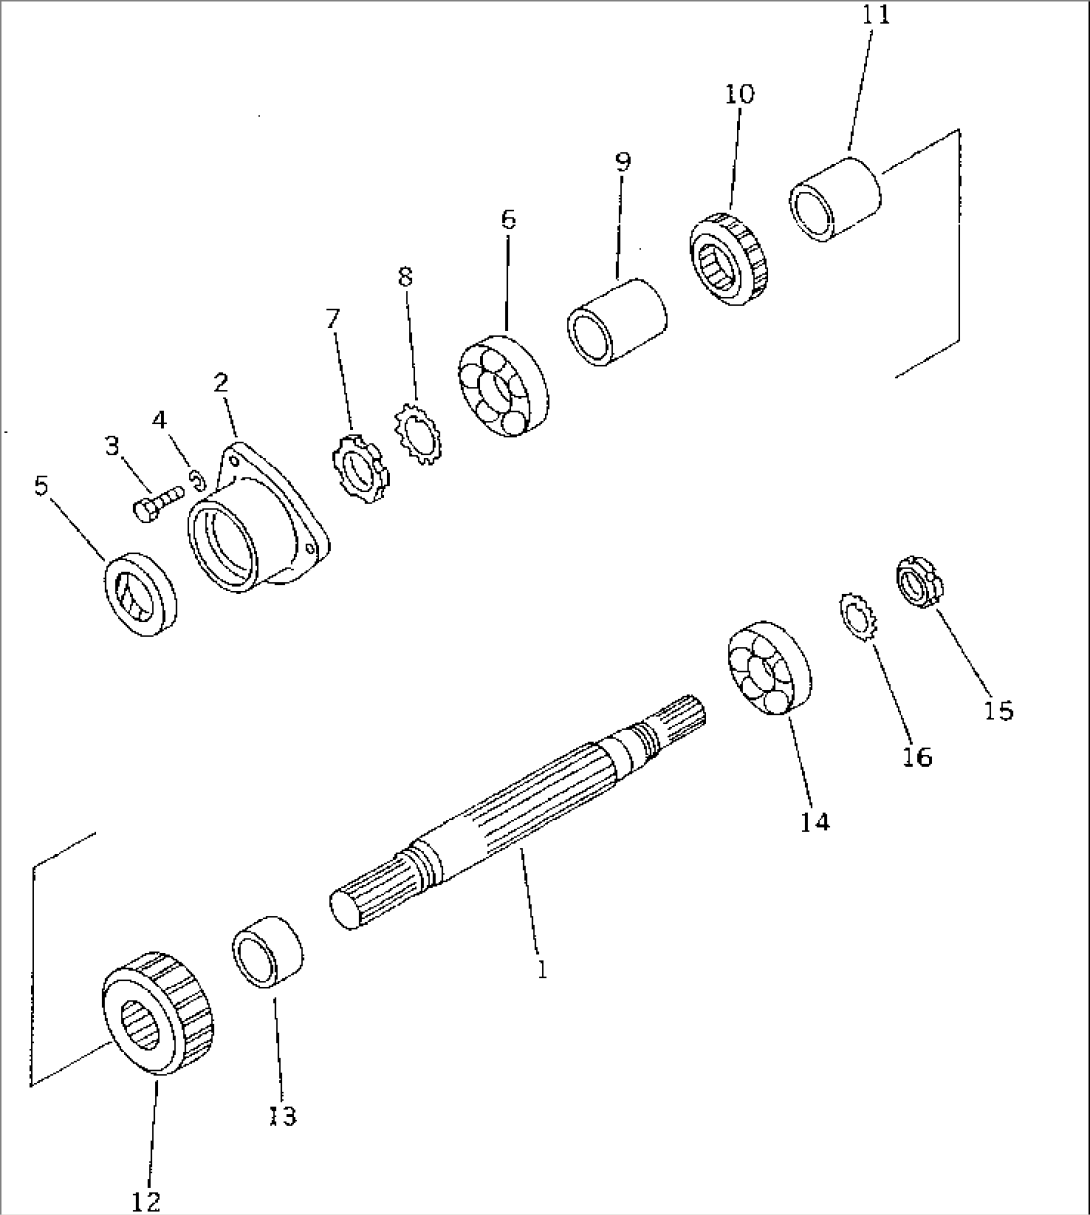 TRANSMISSION (2/5) (MAIN SHAFT AND GEAR)